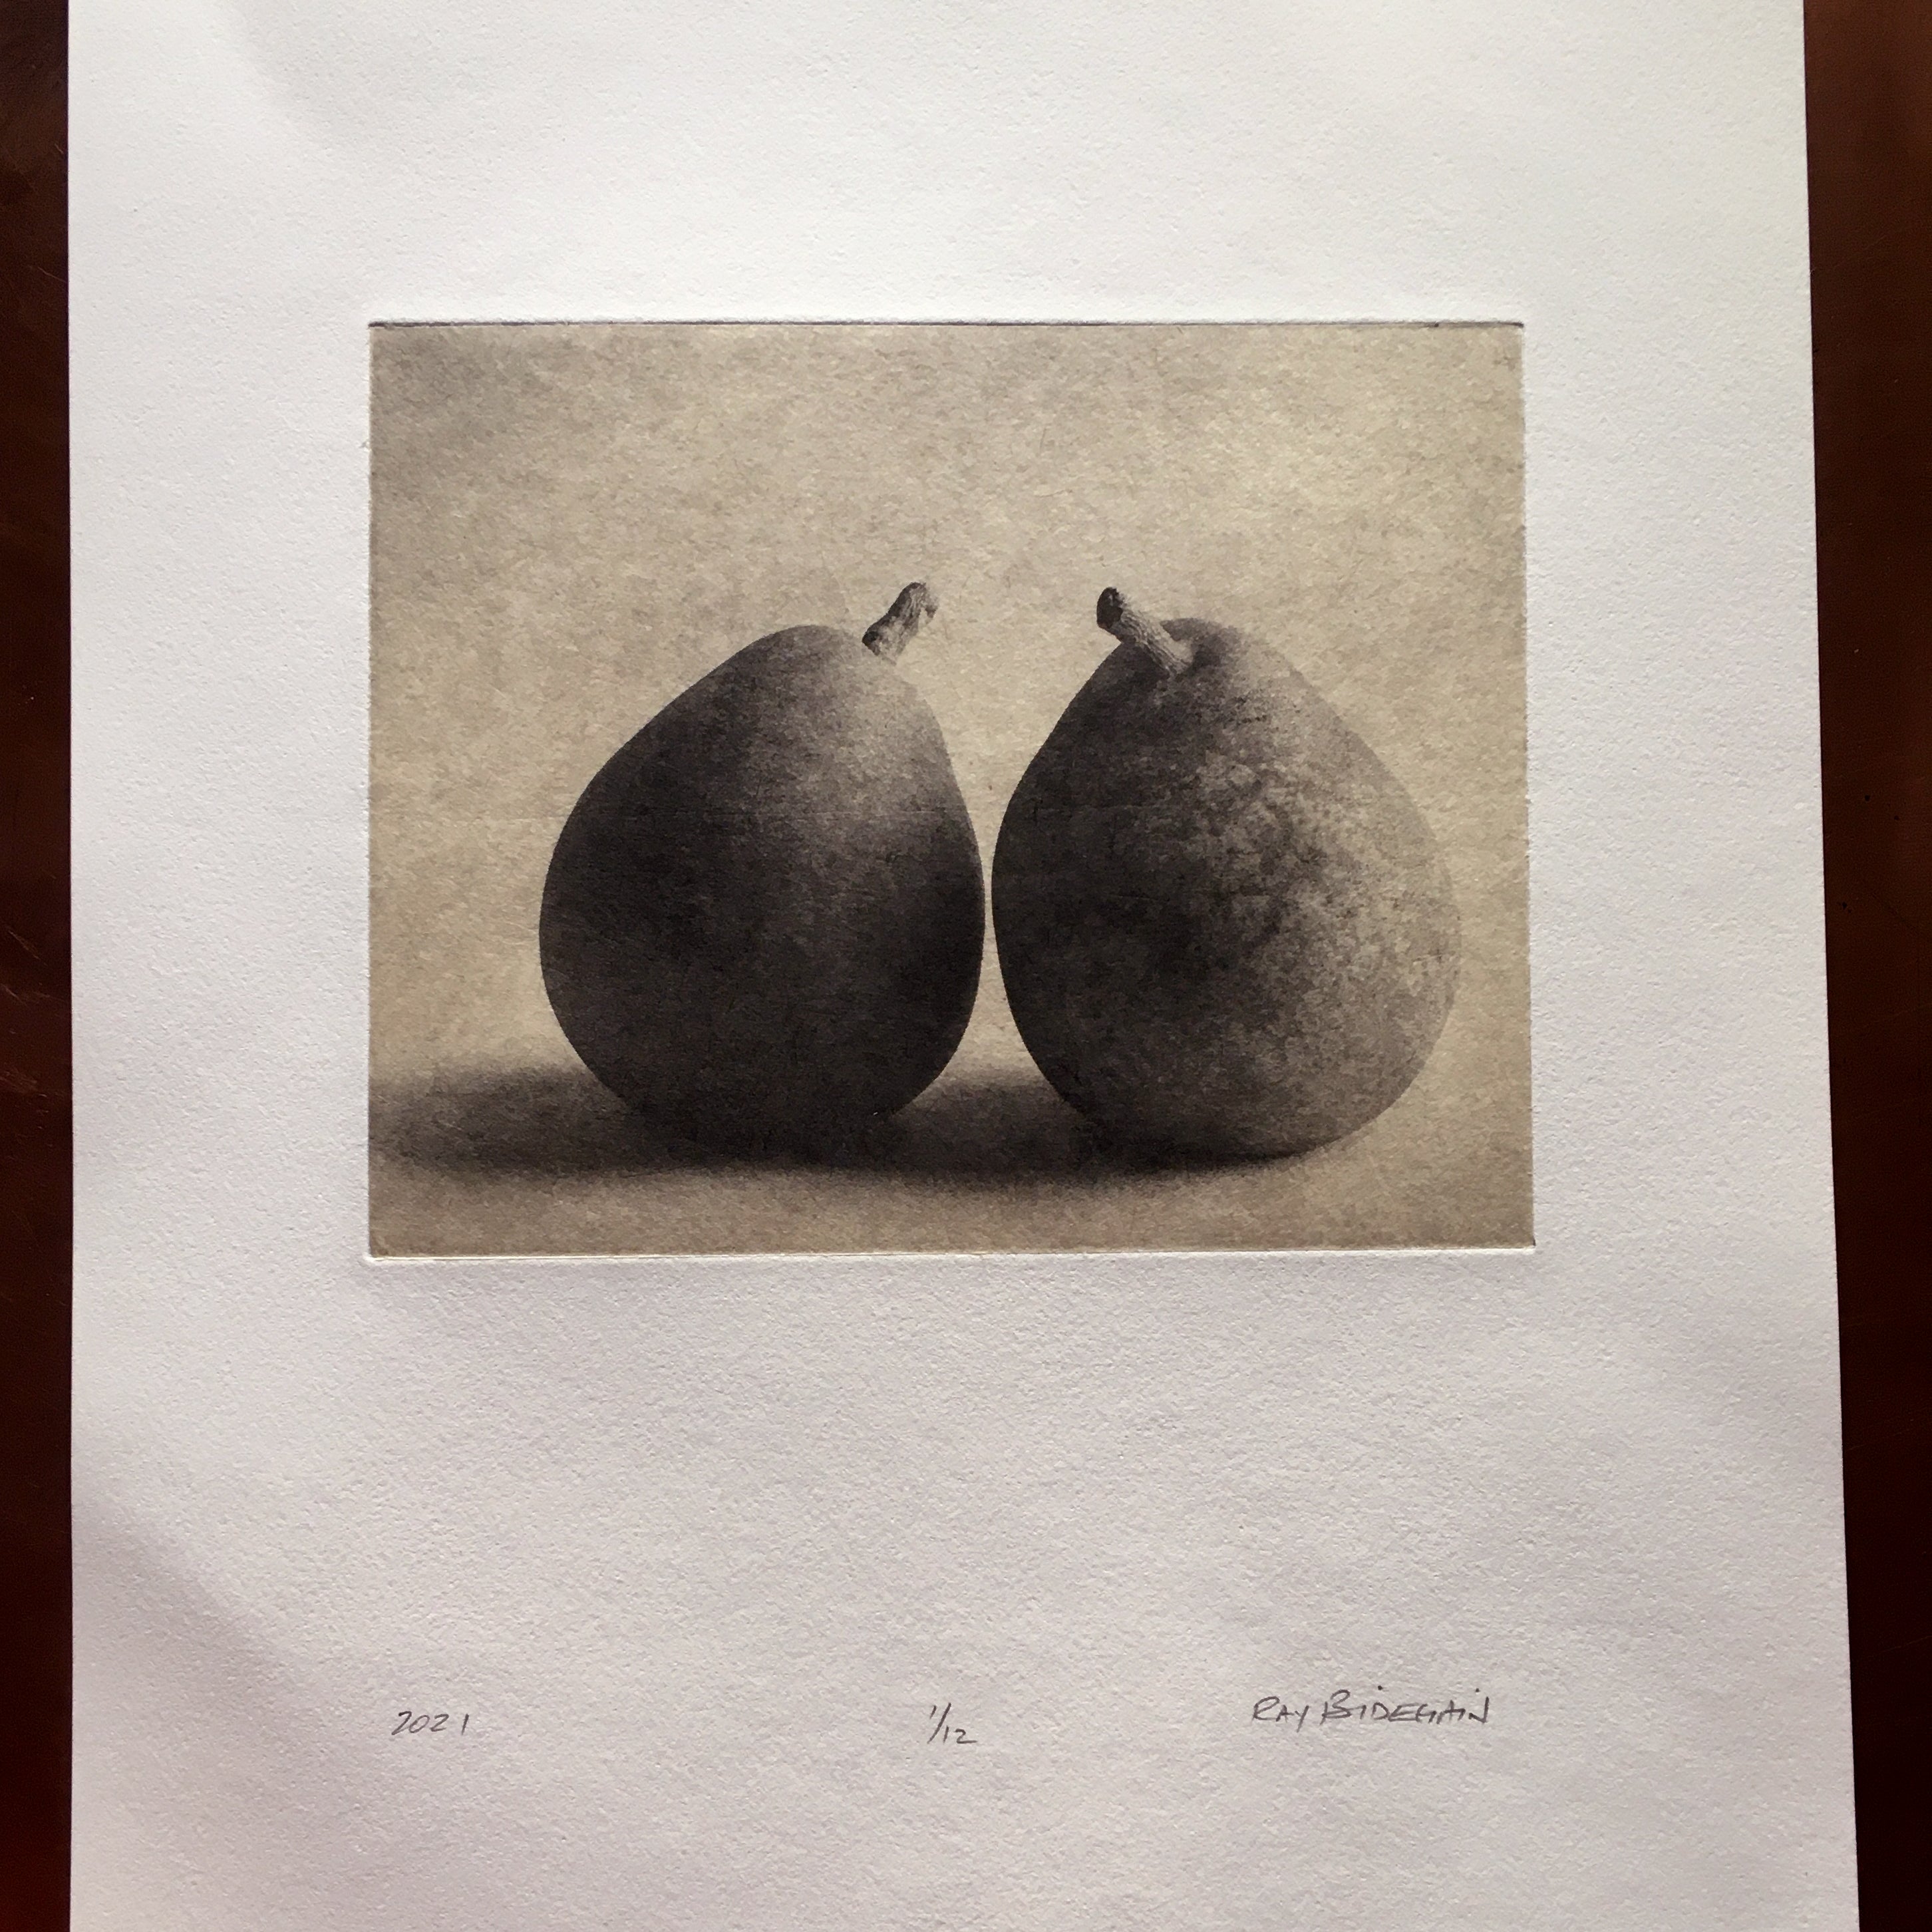 Two Pears   - Polymer photogravure print - Edition 2021